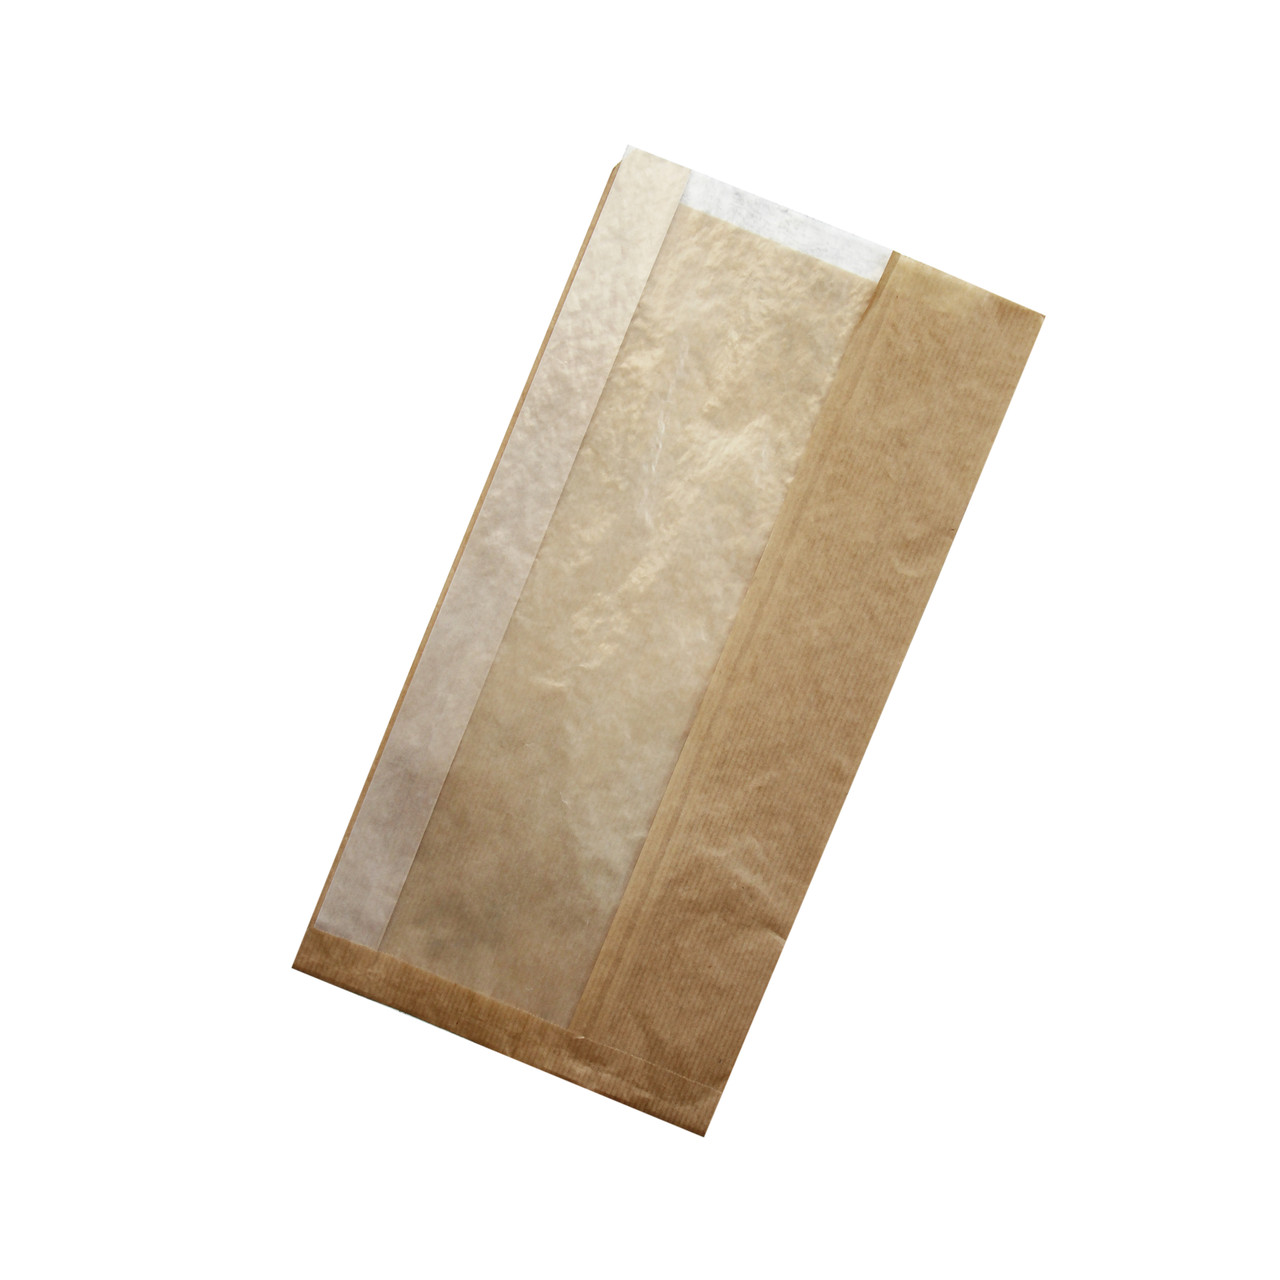 Brown sandwich bag with crystal window L: 15.74in W: 7.9in H: 2.4 - 1000 pcs